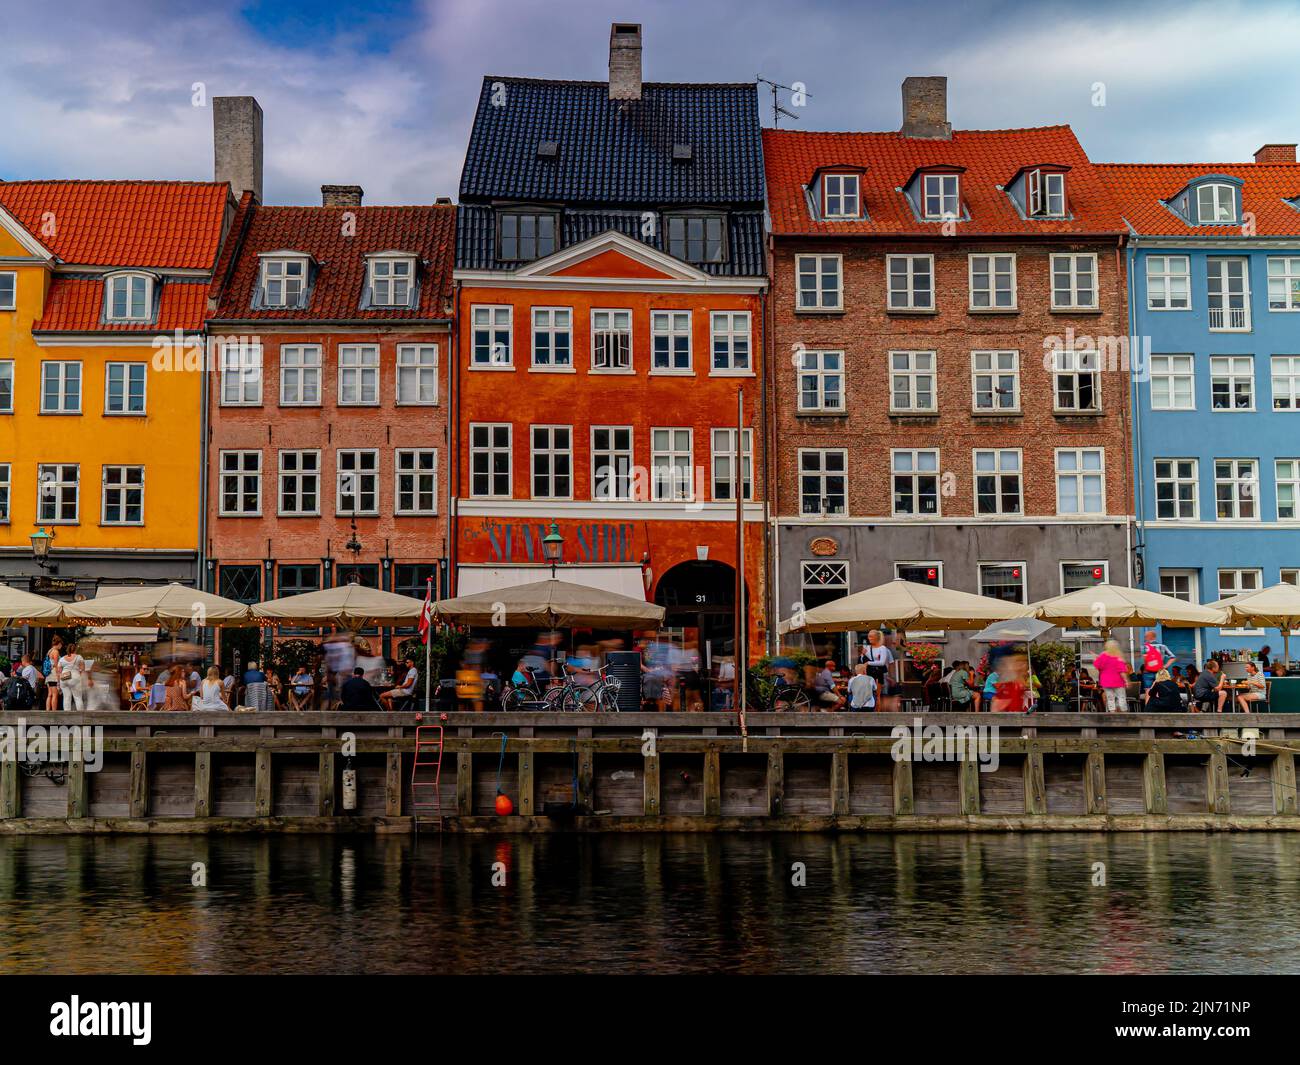 A beautiful shot of a famous tourist spot Nyhavn in Copenhagen with colorful buildings and a waterscape Stock Photo